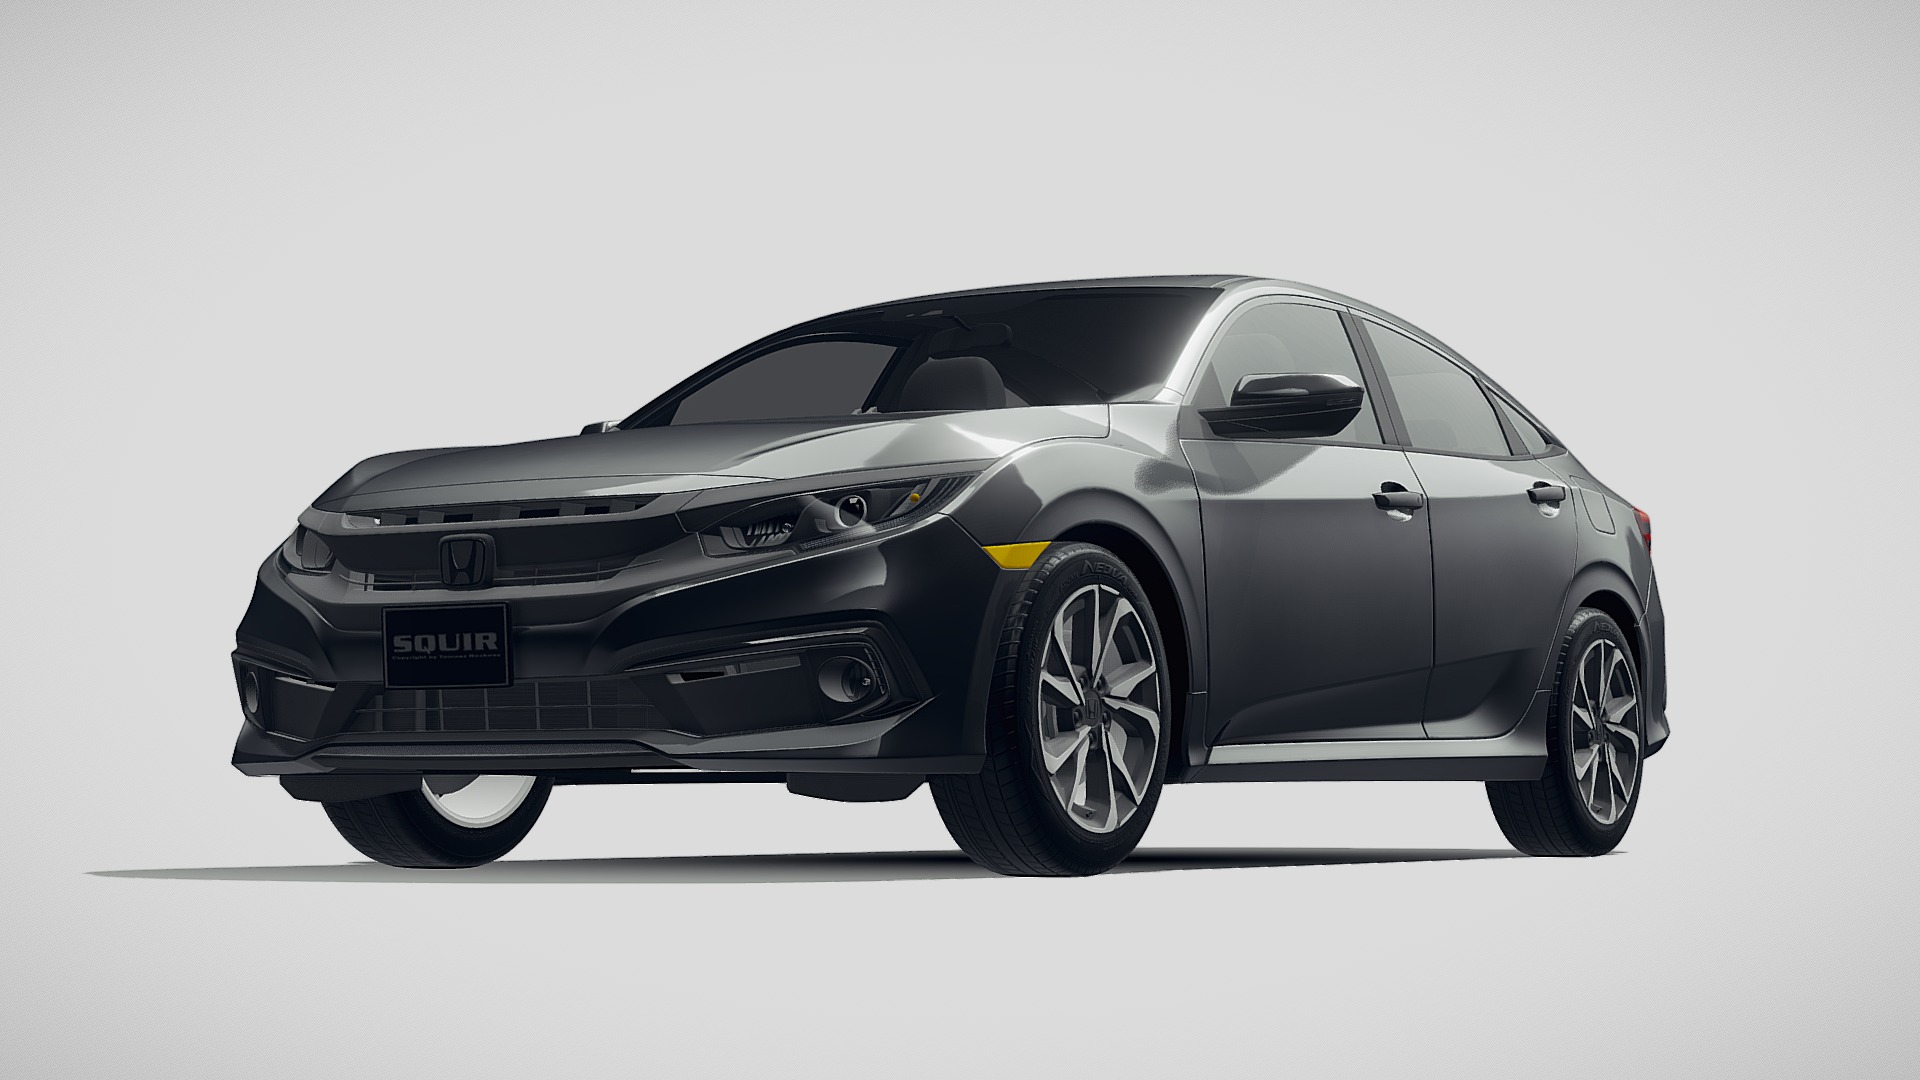 3D model Honda Civic 2019 - This is a 3D model of the Honda Civic 2019. The 3D model is about a black car with a white background.